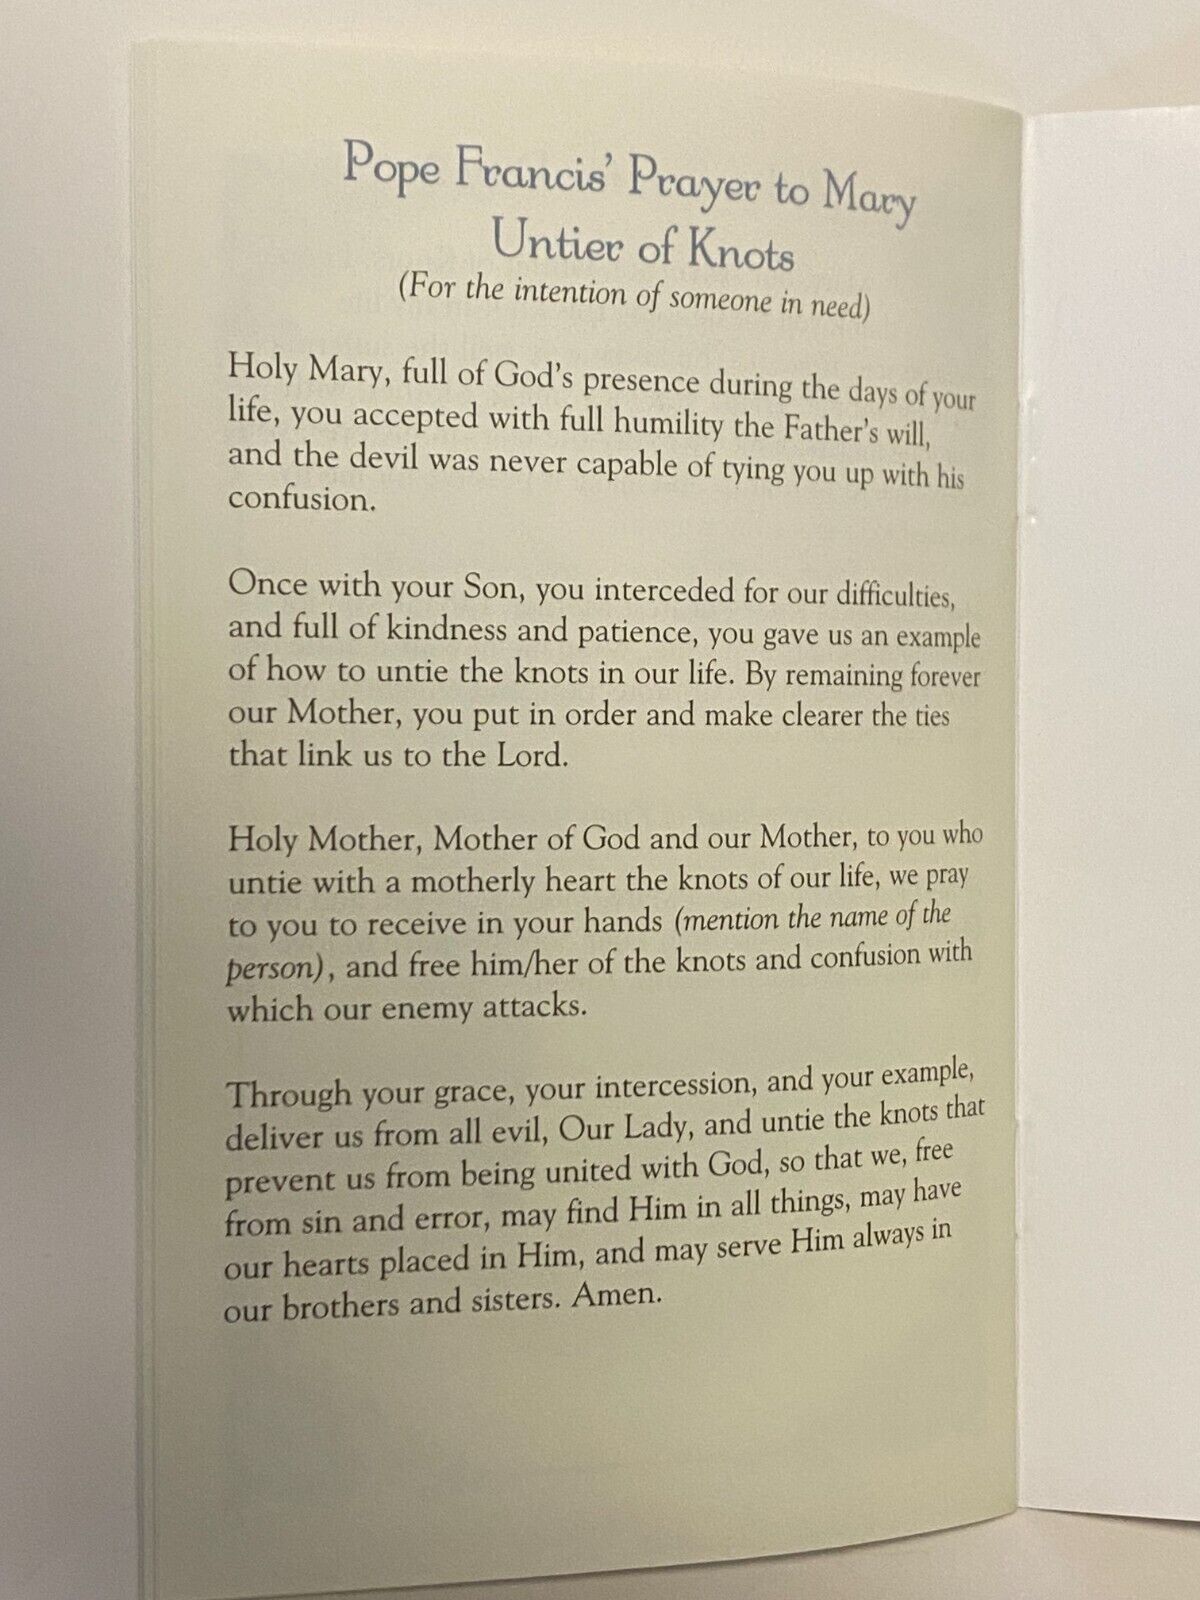 Our Lady Undoer (Untier) of Knots Novena Booklet, New - Bob and Penny Lord